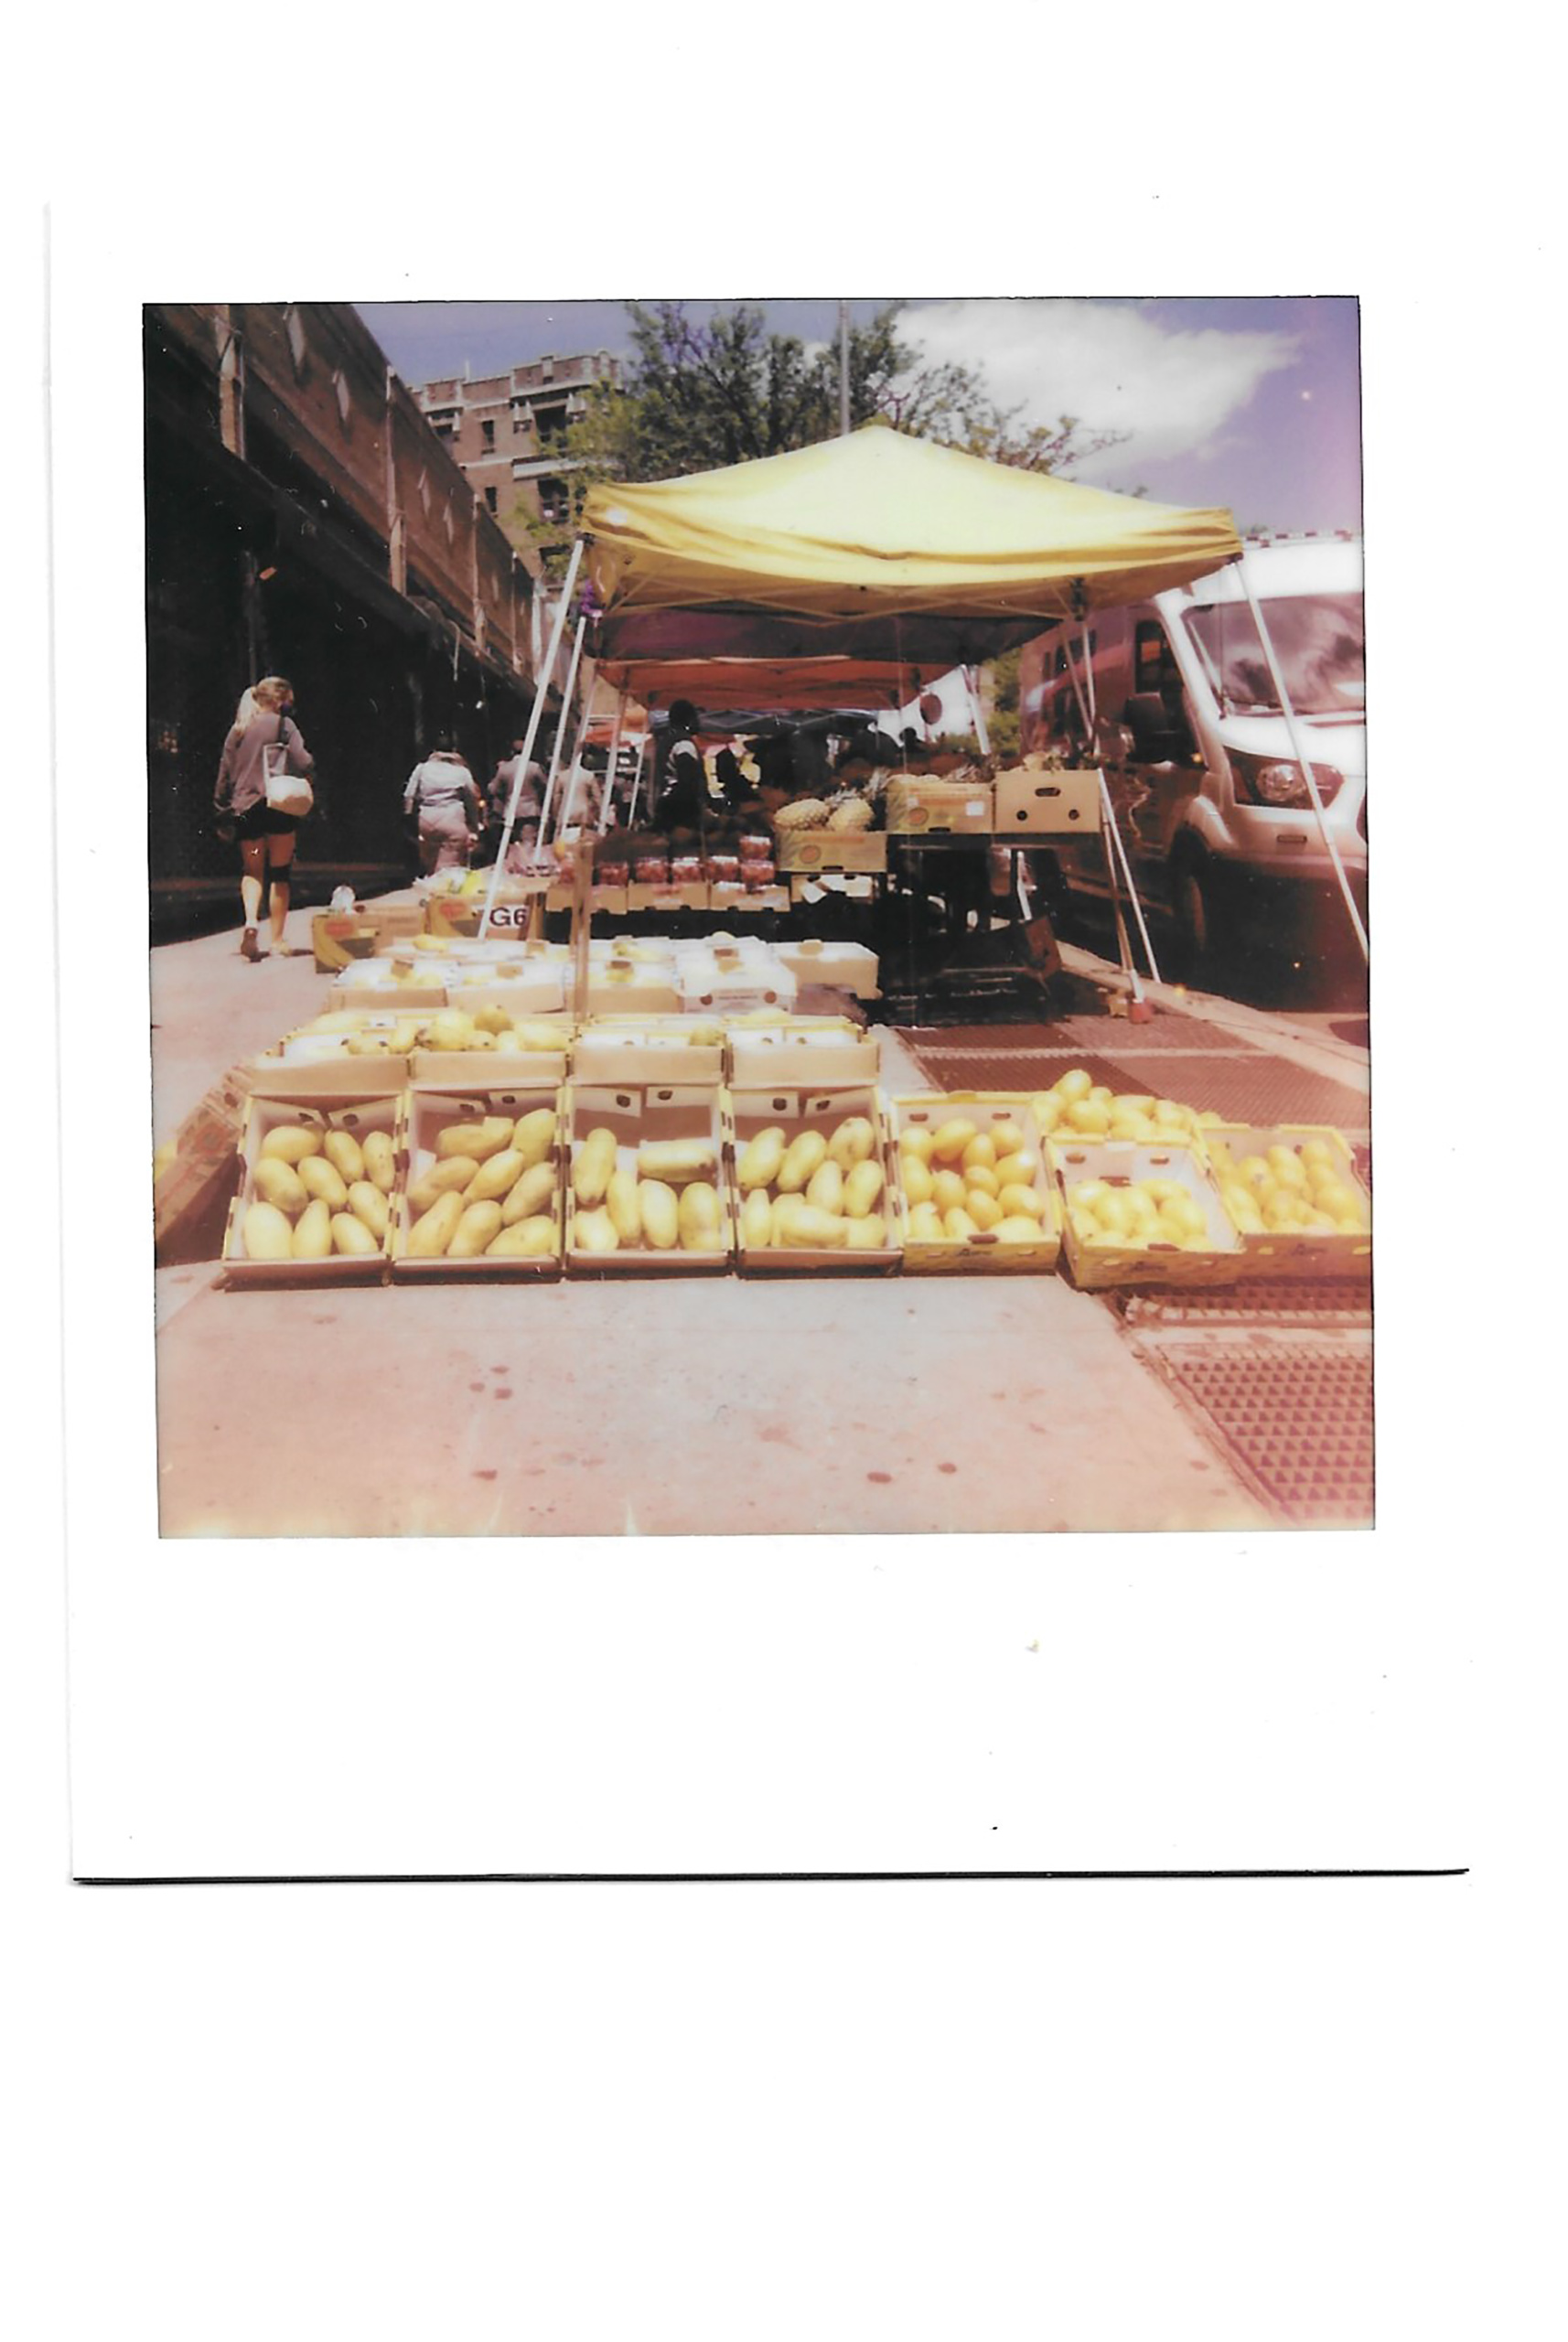 FRUIT STAND ON CORNER OF VERMILYEA AVE AND BROADWAY/ DYCKMAN. Dyckman (now officially Little DR) is where I lived most of my life. It’s what I think of when I think of home. I’ve moved back and forth between neighborhoods and between islands. The produce stand is a necessity in neighborhoods strewn with fast food joints and liquor stores. I worried about them during pandemic lockdowns. The low prices offer affordable healthy choices. They remind the community of outdoor markets in the islands. The most important reminders are on the colorful displays which scream, “MANGOES DON’T GROW ON MANHATTAN TREES.”